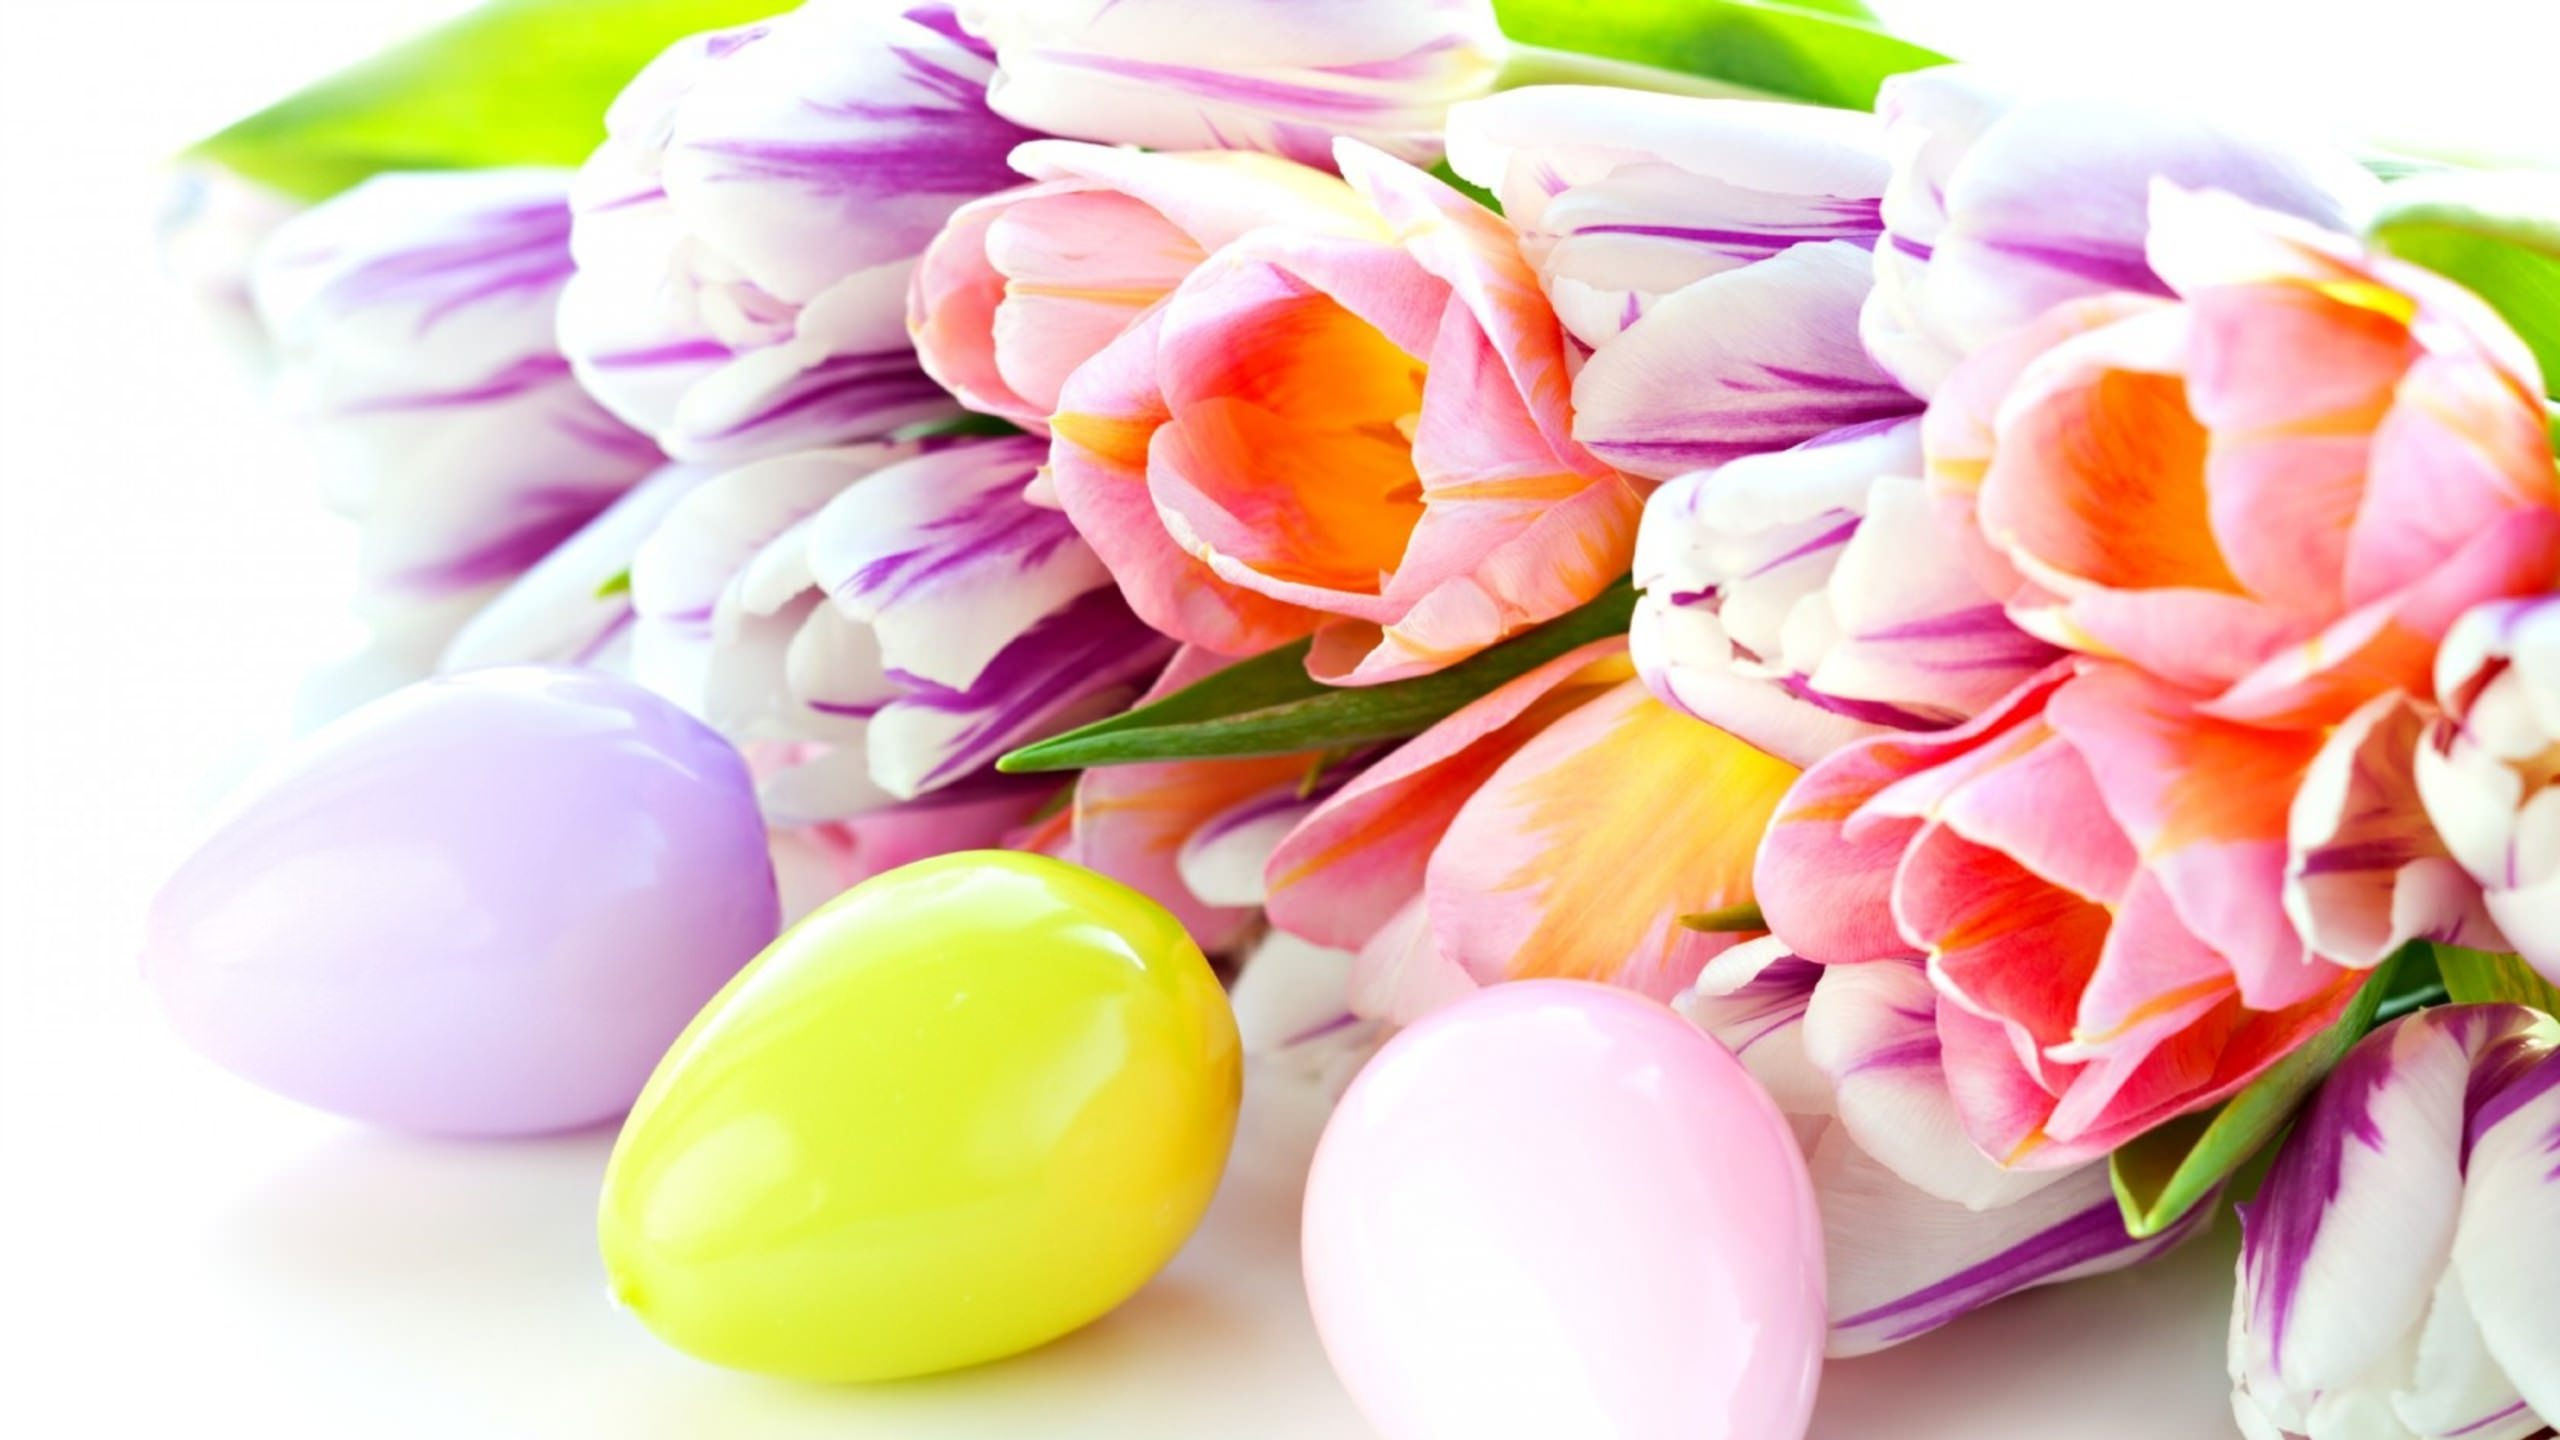 Pink and Yellow Tulips on White Surface. Wallpaper in 2560x1440 Resolution